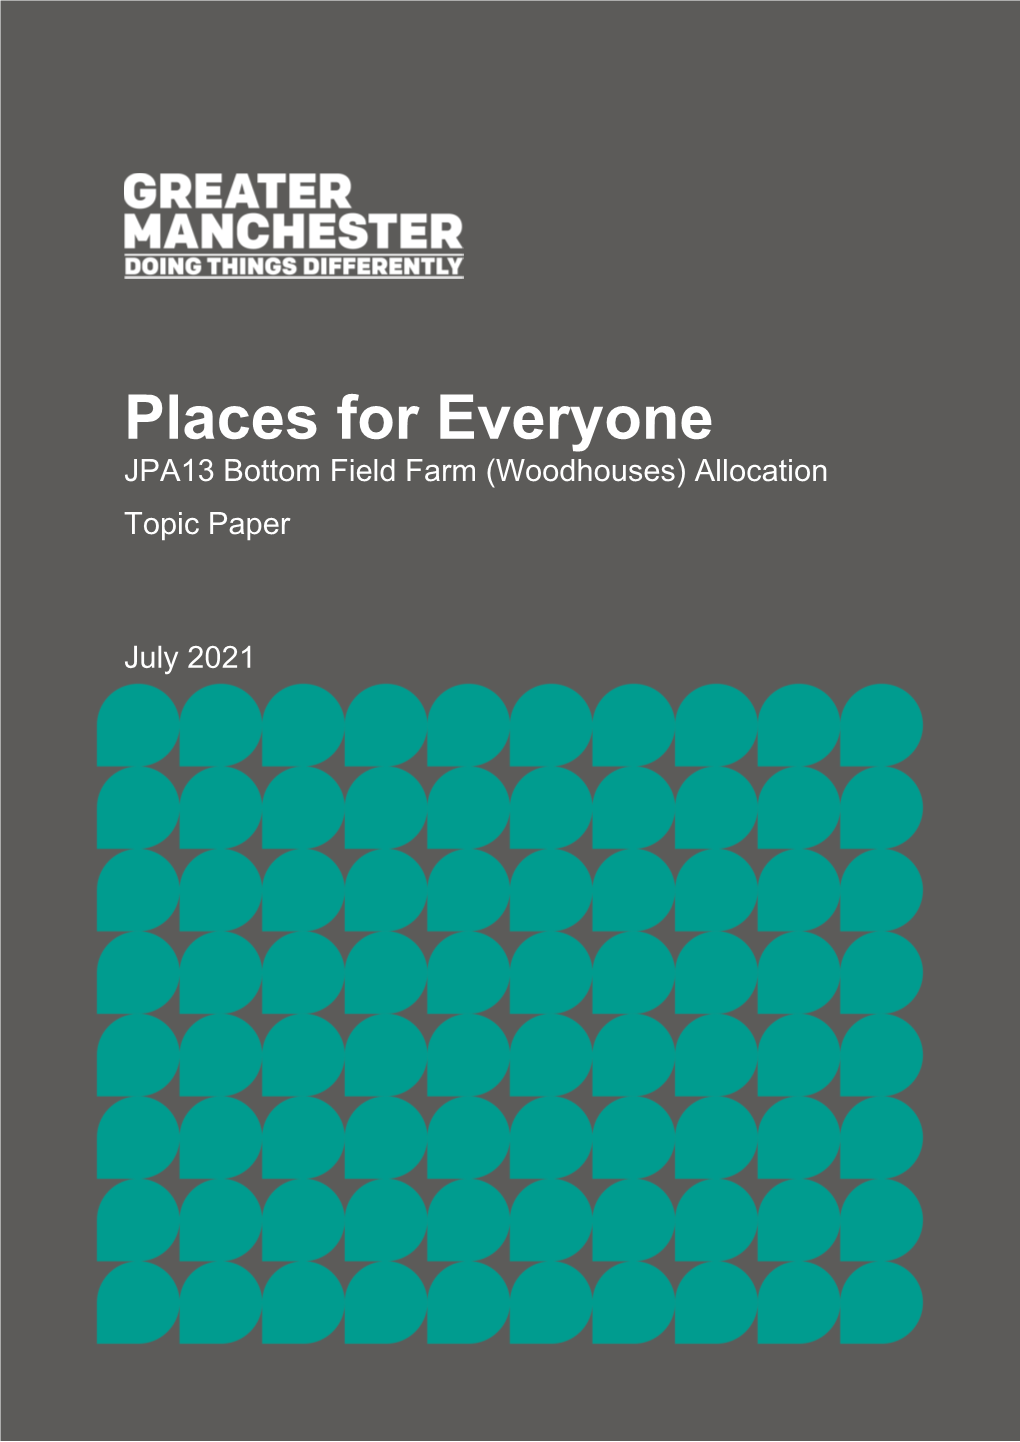 Places for Everyone JPA13 Bottom Field Farm (Woodhouses) Allocation Topic Paper